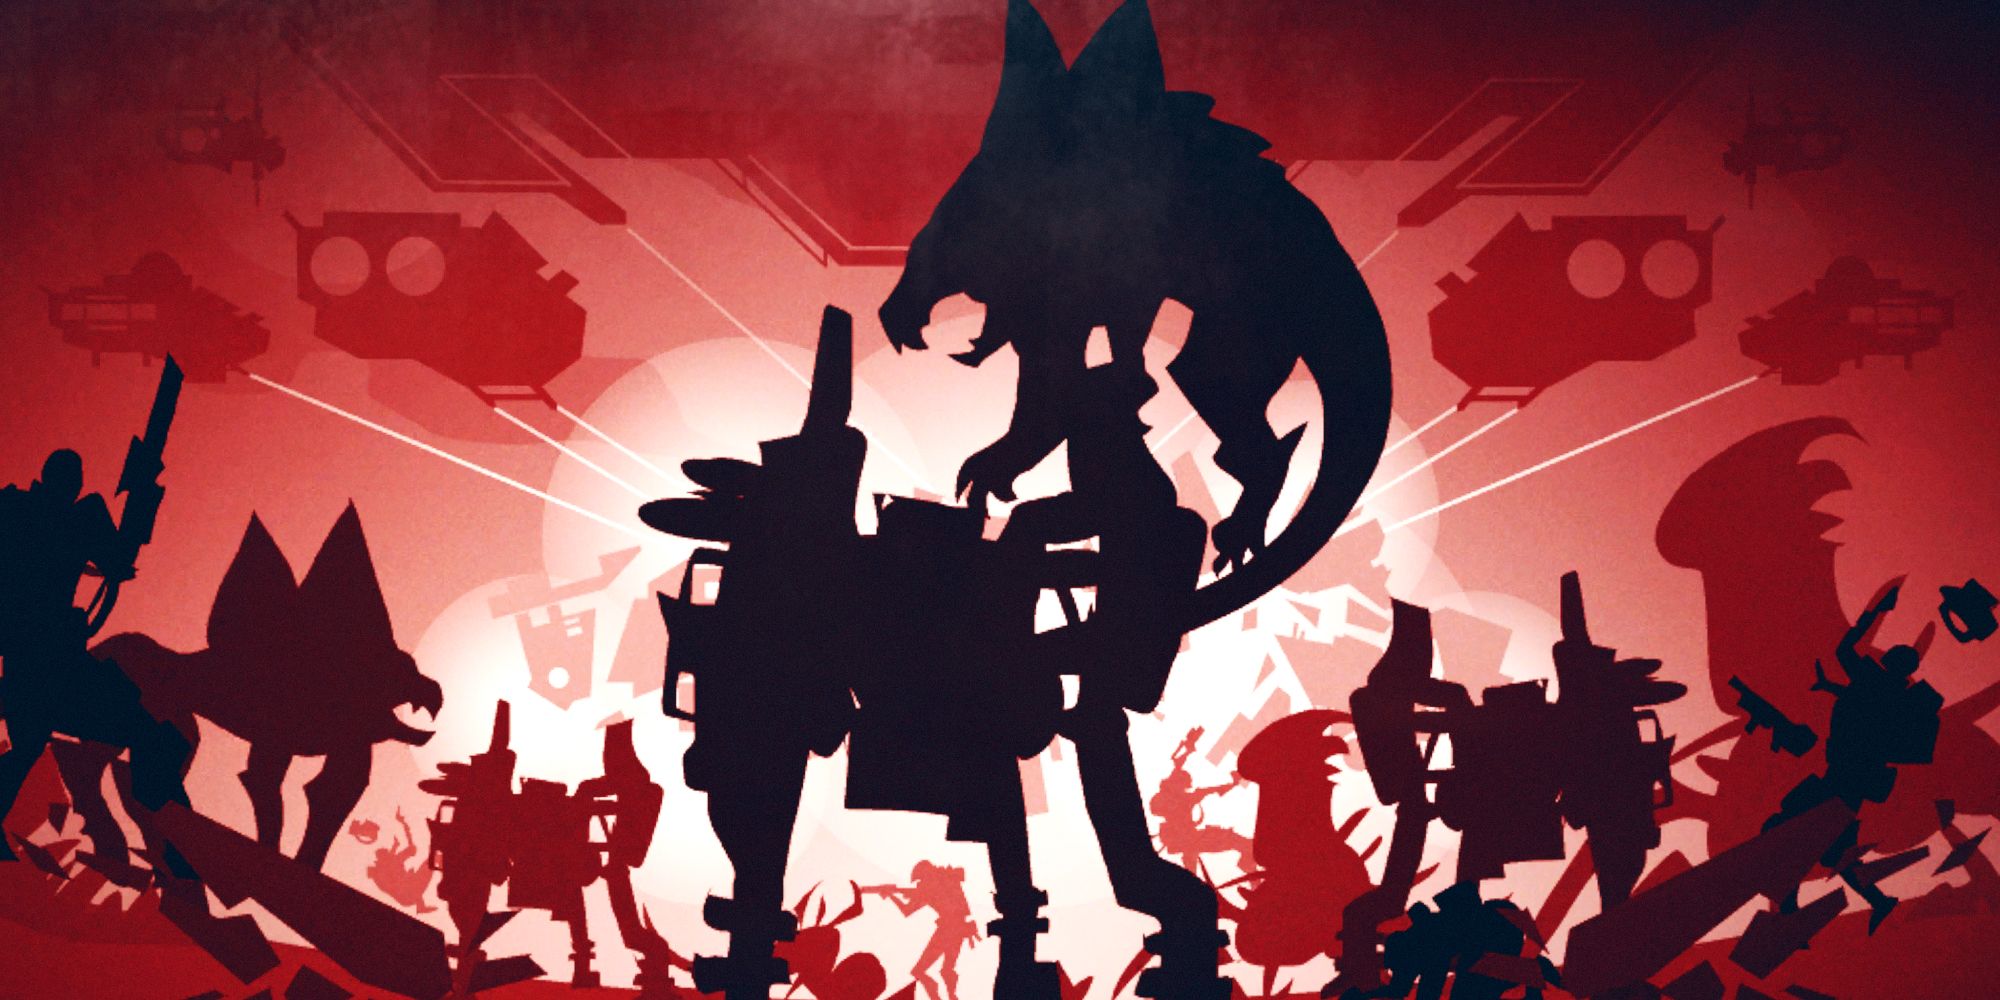 A screenshot of a piece of artwork in Starfield depicting the Colony War. In all red, black, and white silhouette, spaceships firing weapons fly above a battle between soldiers, mechs, and aliens known as Xenoweapons. In the very center, a mech is picking up a roaring Xenoweapon.